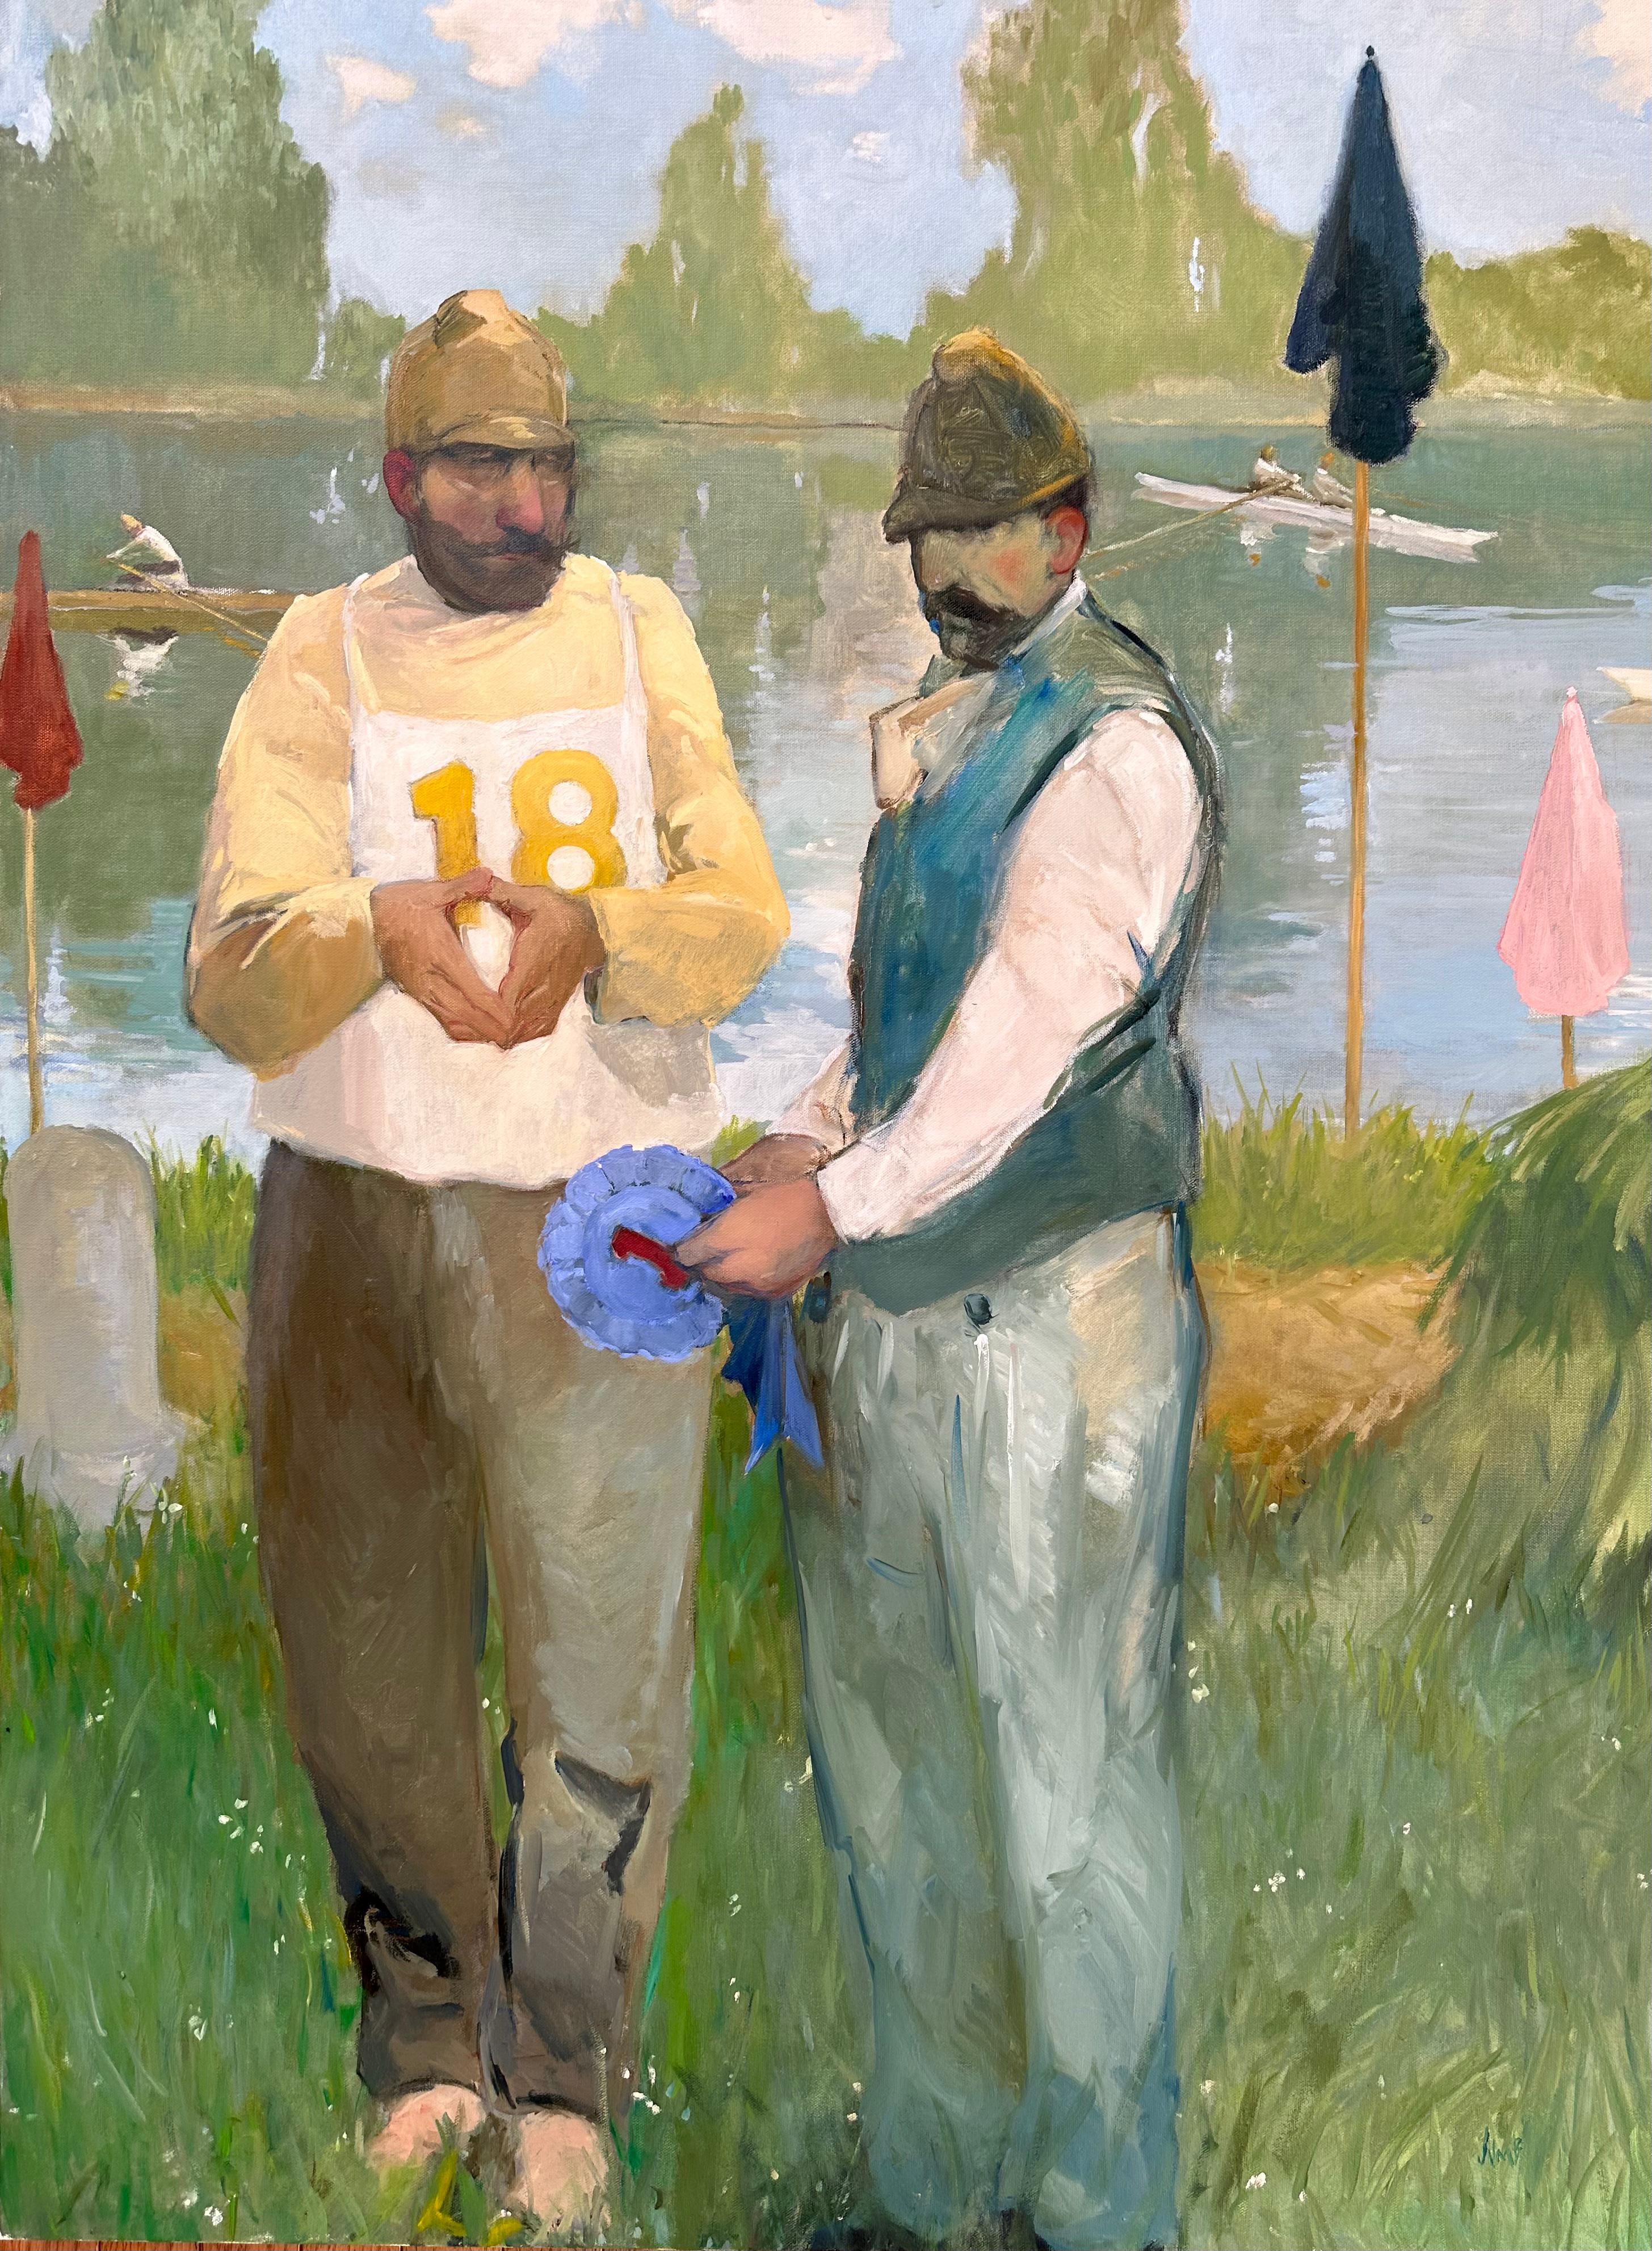 "The Regatta" Oil painting of two men at boat race, Impressionism, Lake front